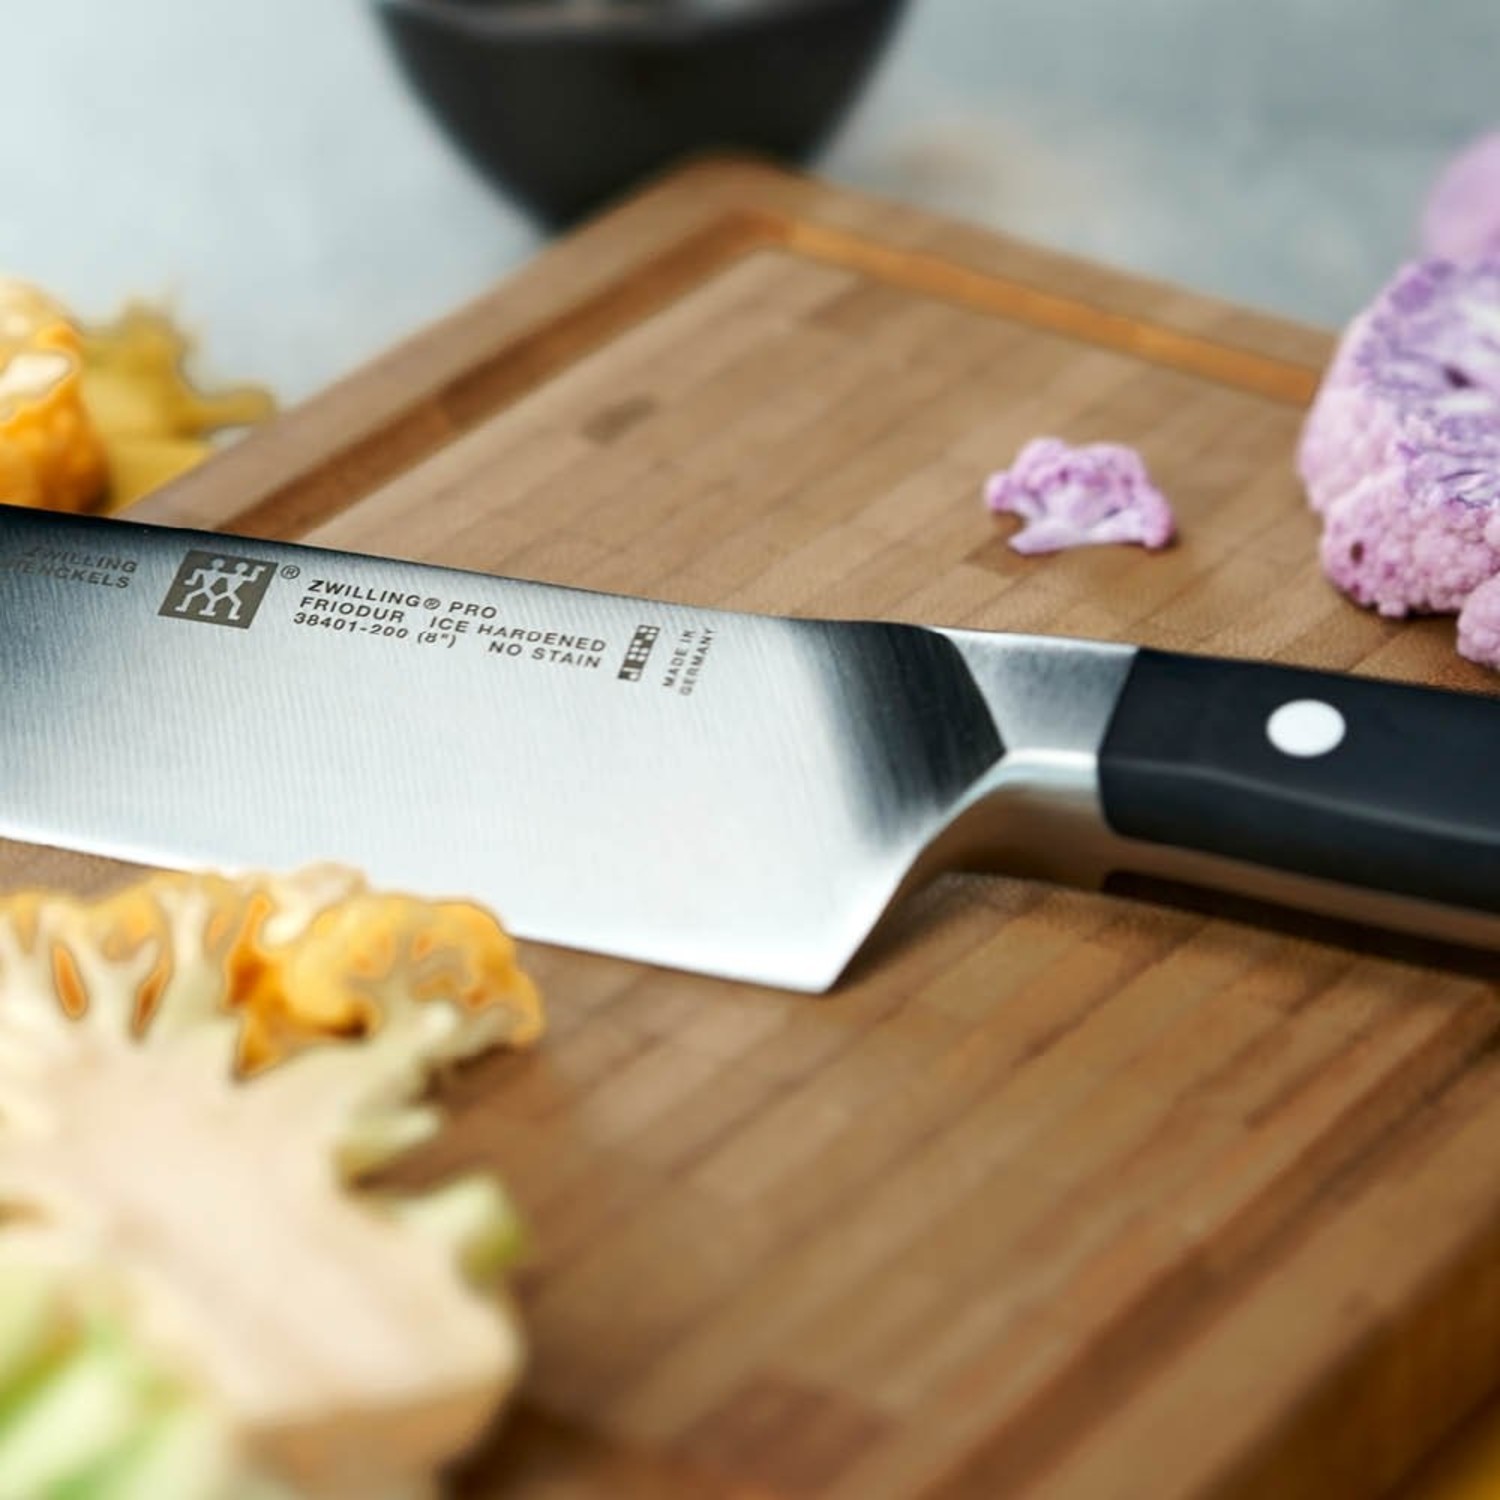 ZWILLING Pro 6 Cleaver 